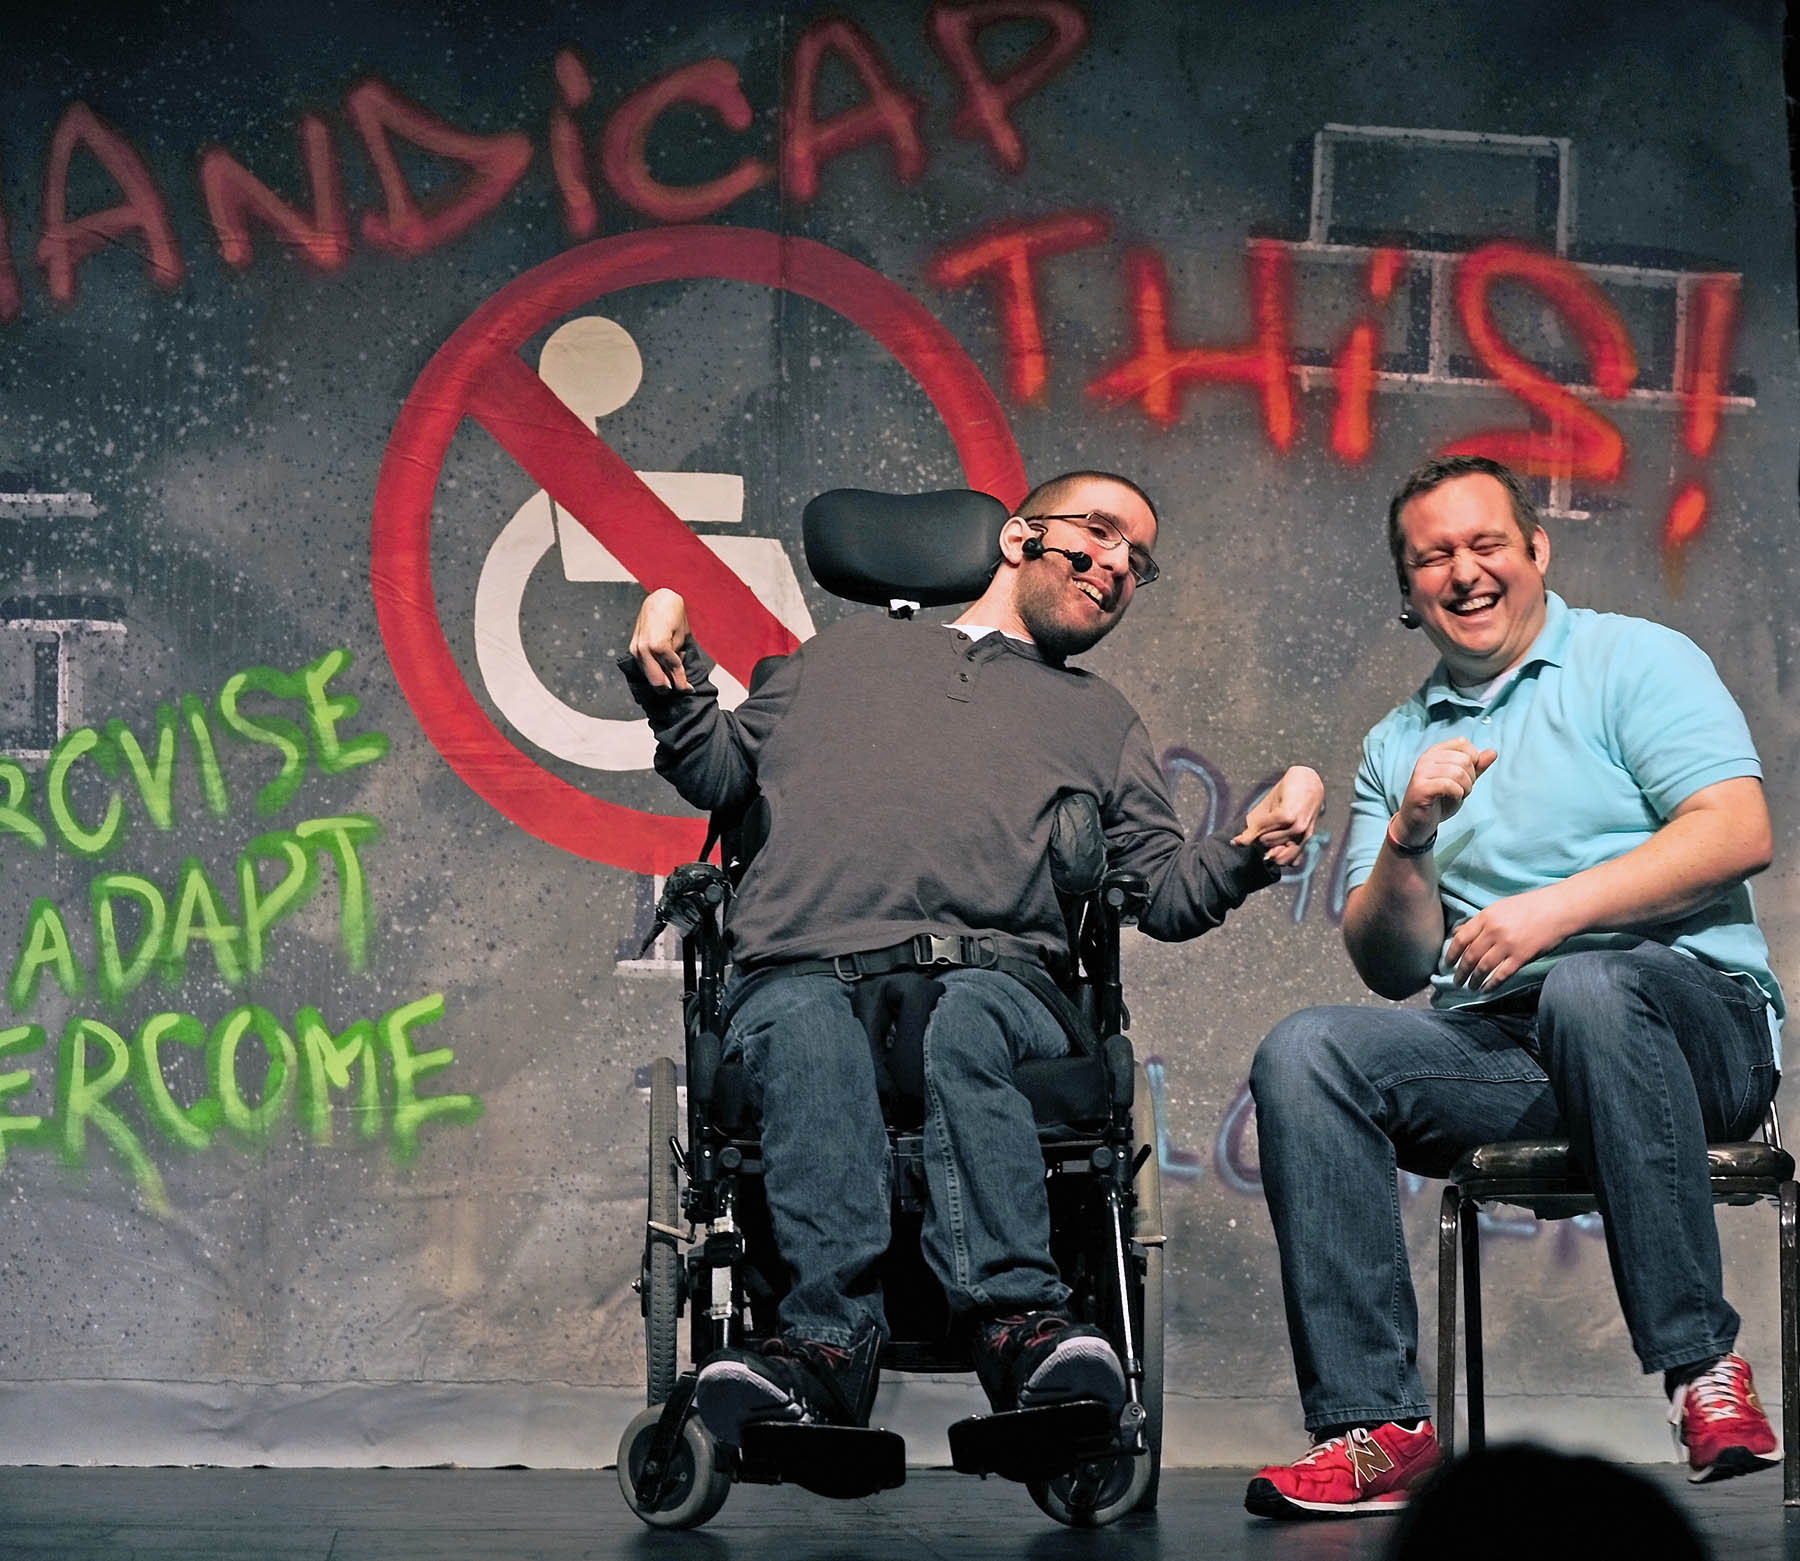 Step Up Productions Presents HANDICAP THIS! Written & Performed by Mike Berkson and Tim Wambach Jan. 21 – 25, 2015 at Stage 773 1 Step Up Productions continues its 2014-15 season with a special one-week engagement of the touching and humorous two-man show HANDICAP THIS! – part comedy, part storytelling and part insight on living with disabilities. Written and performed by nationally acclaimed duo Mike Berkson and Tim Wambach, HANDICAP THIS! is inspired by the original script by Molly Mulcrone and directed by Denis Berkson. This special collaboration will play January 21 – 25, 2015 at Stage 773, 1225 W. Belmont Ave. in Chicago. Tickets are available at www.stepupproductions.org or www.stage773.com, by calling (773) 327-5252 or in person at the Stage 773 Box Office. 